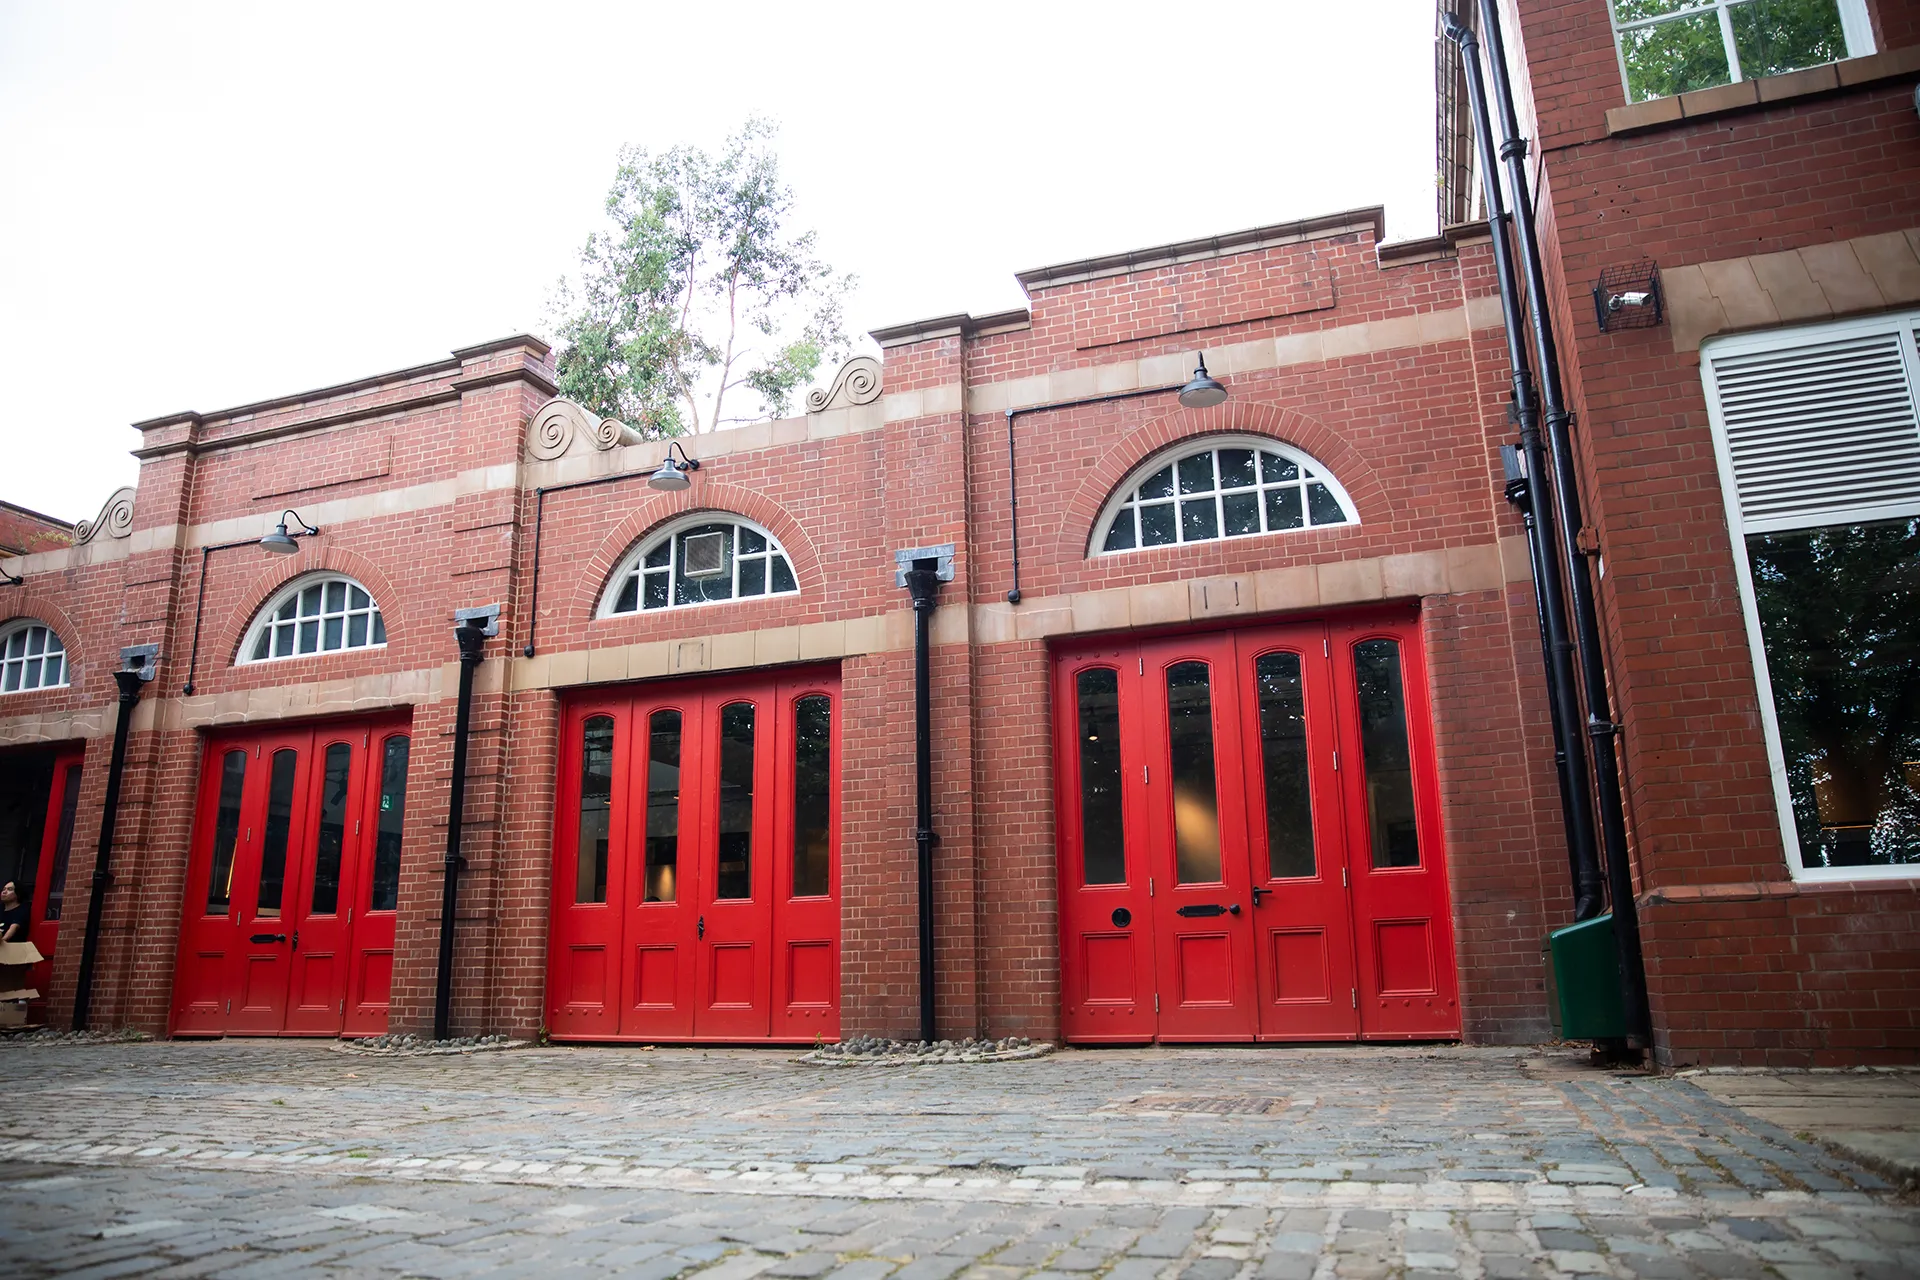 The Old Fire Station cafe bar